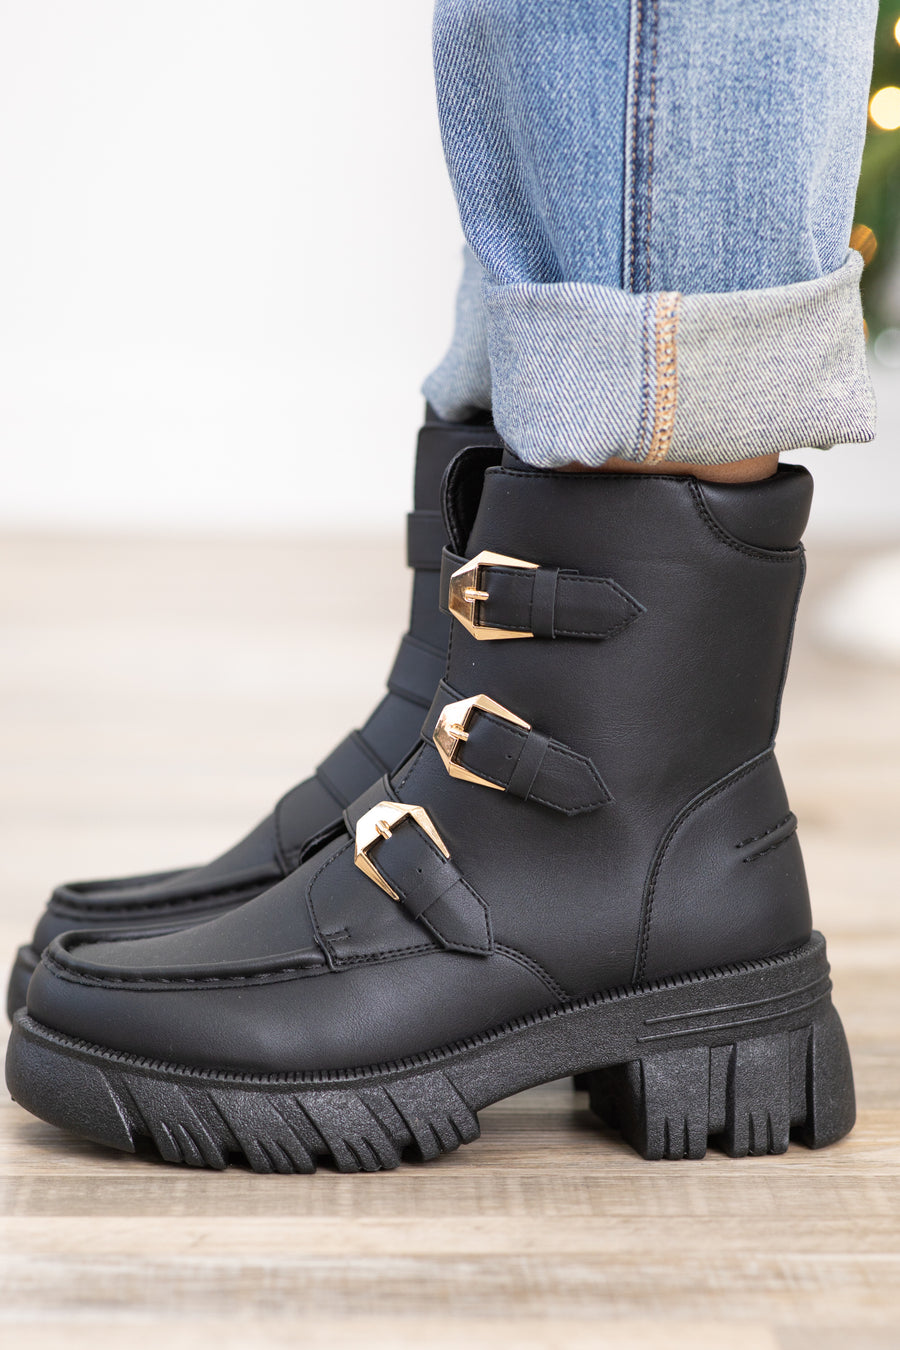 Black Boots With Buckle Detail